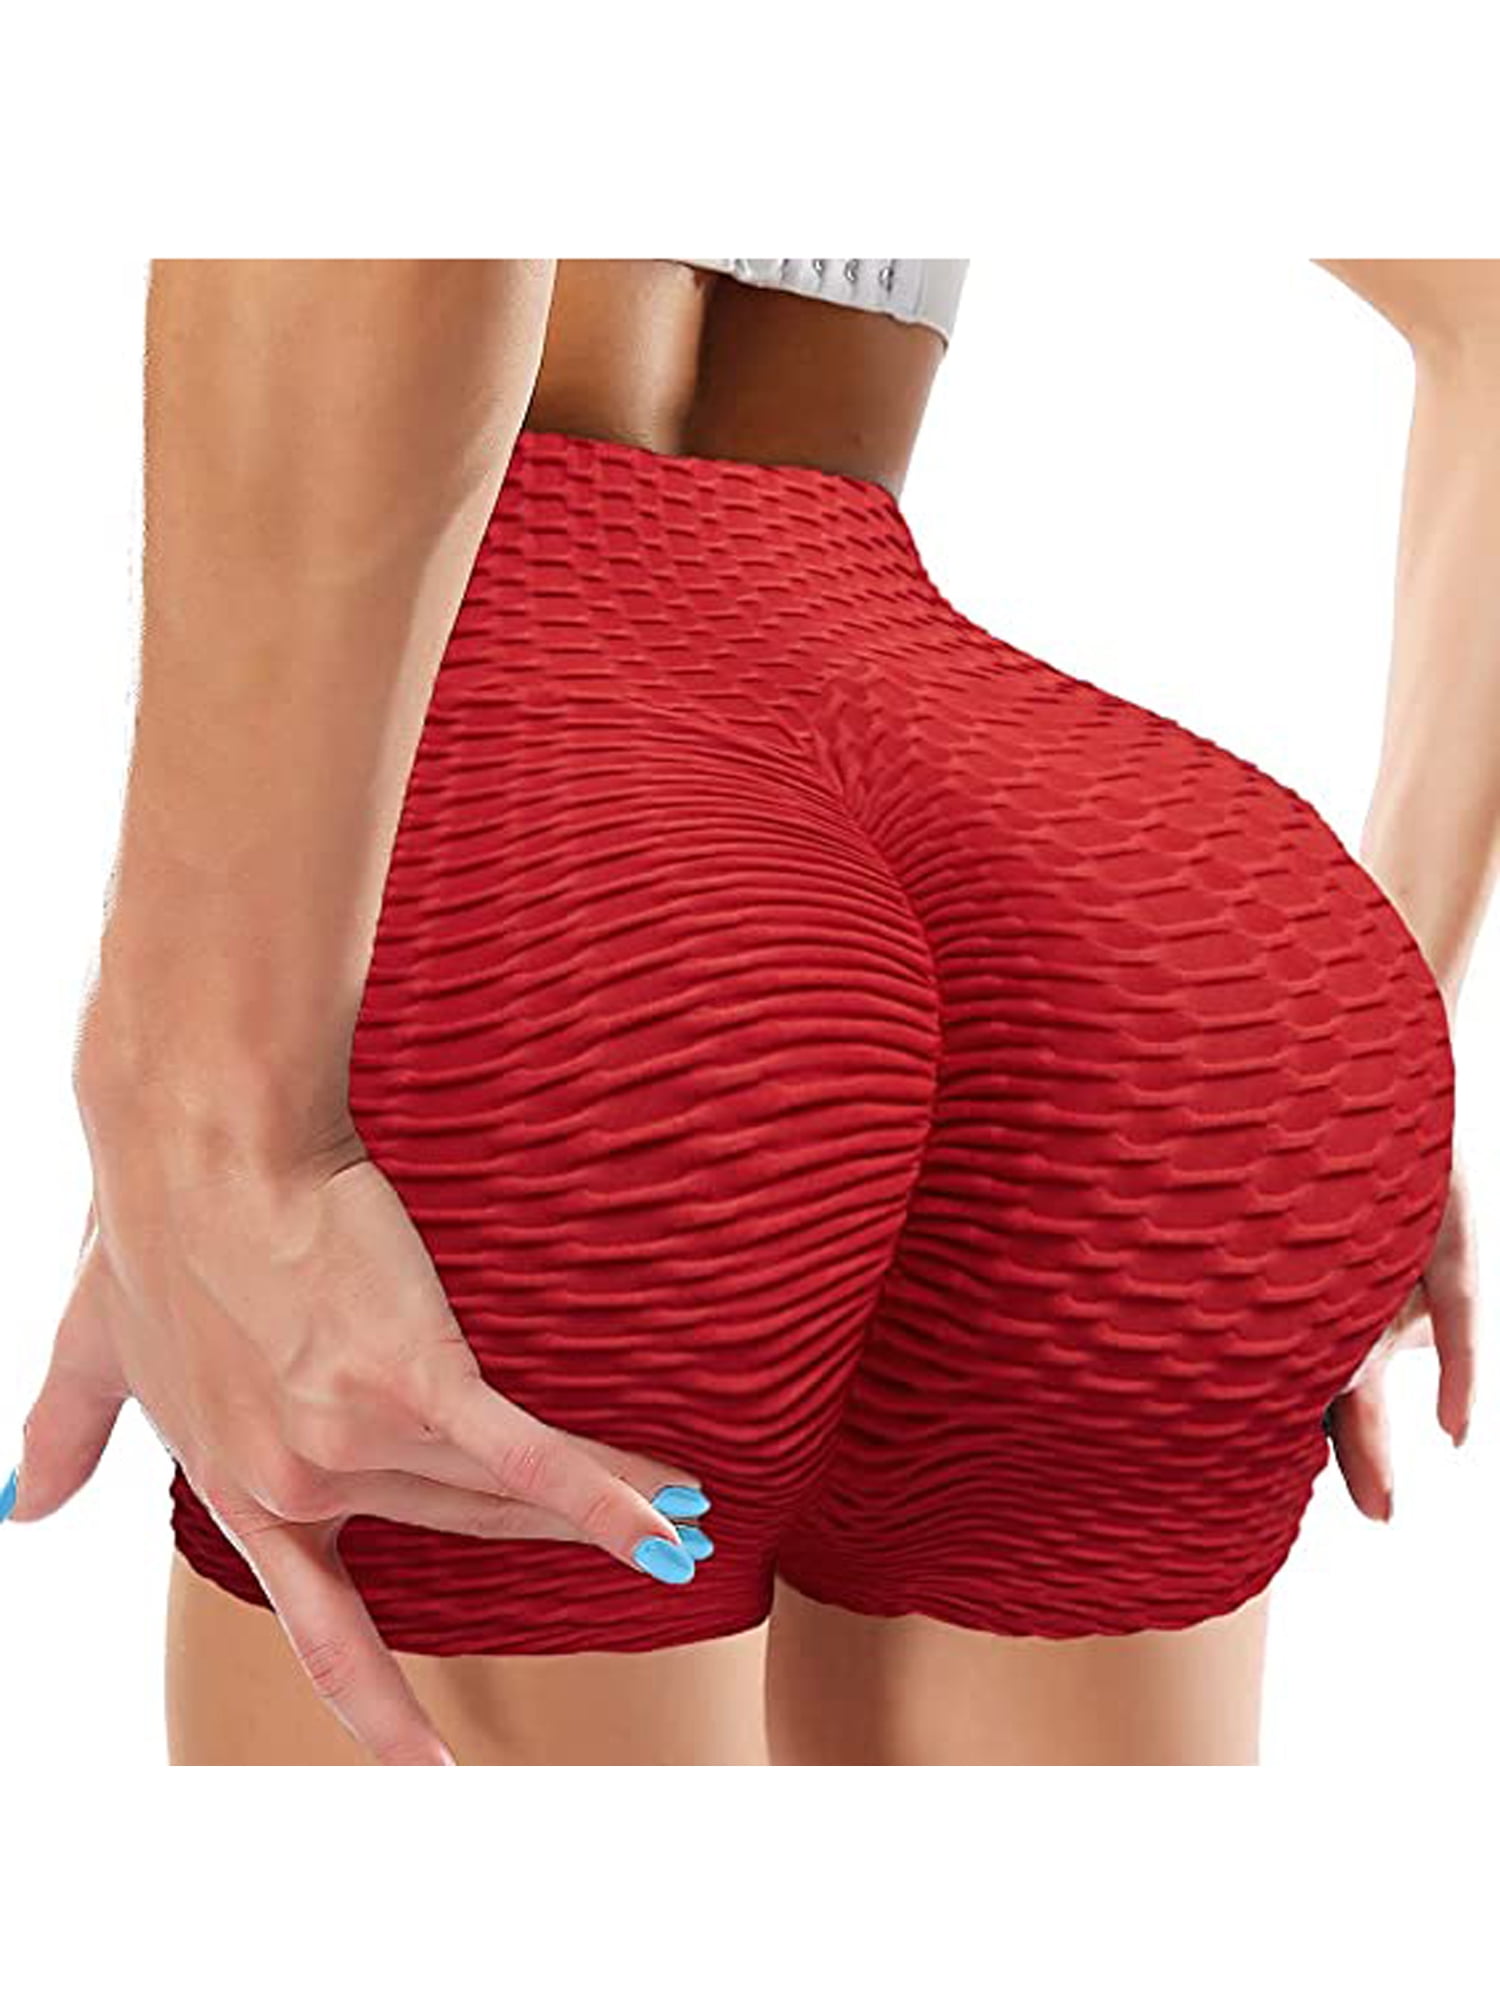 DODOING Women Yoga Shorts Ruched Booty High Waisted Gym Workout Shorts Butt Lifting Yoga Pants Shorts